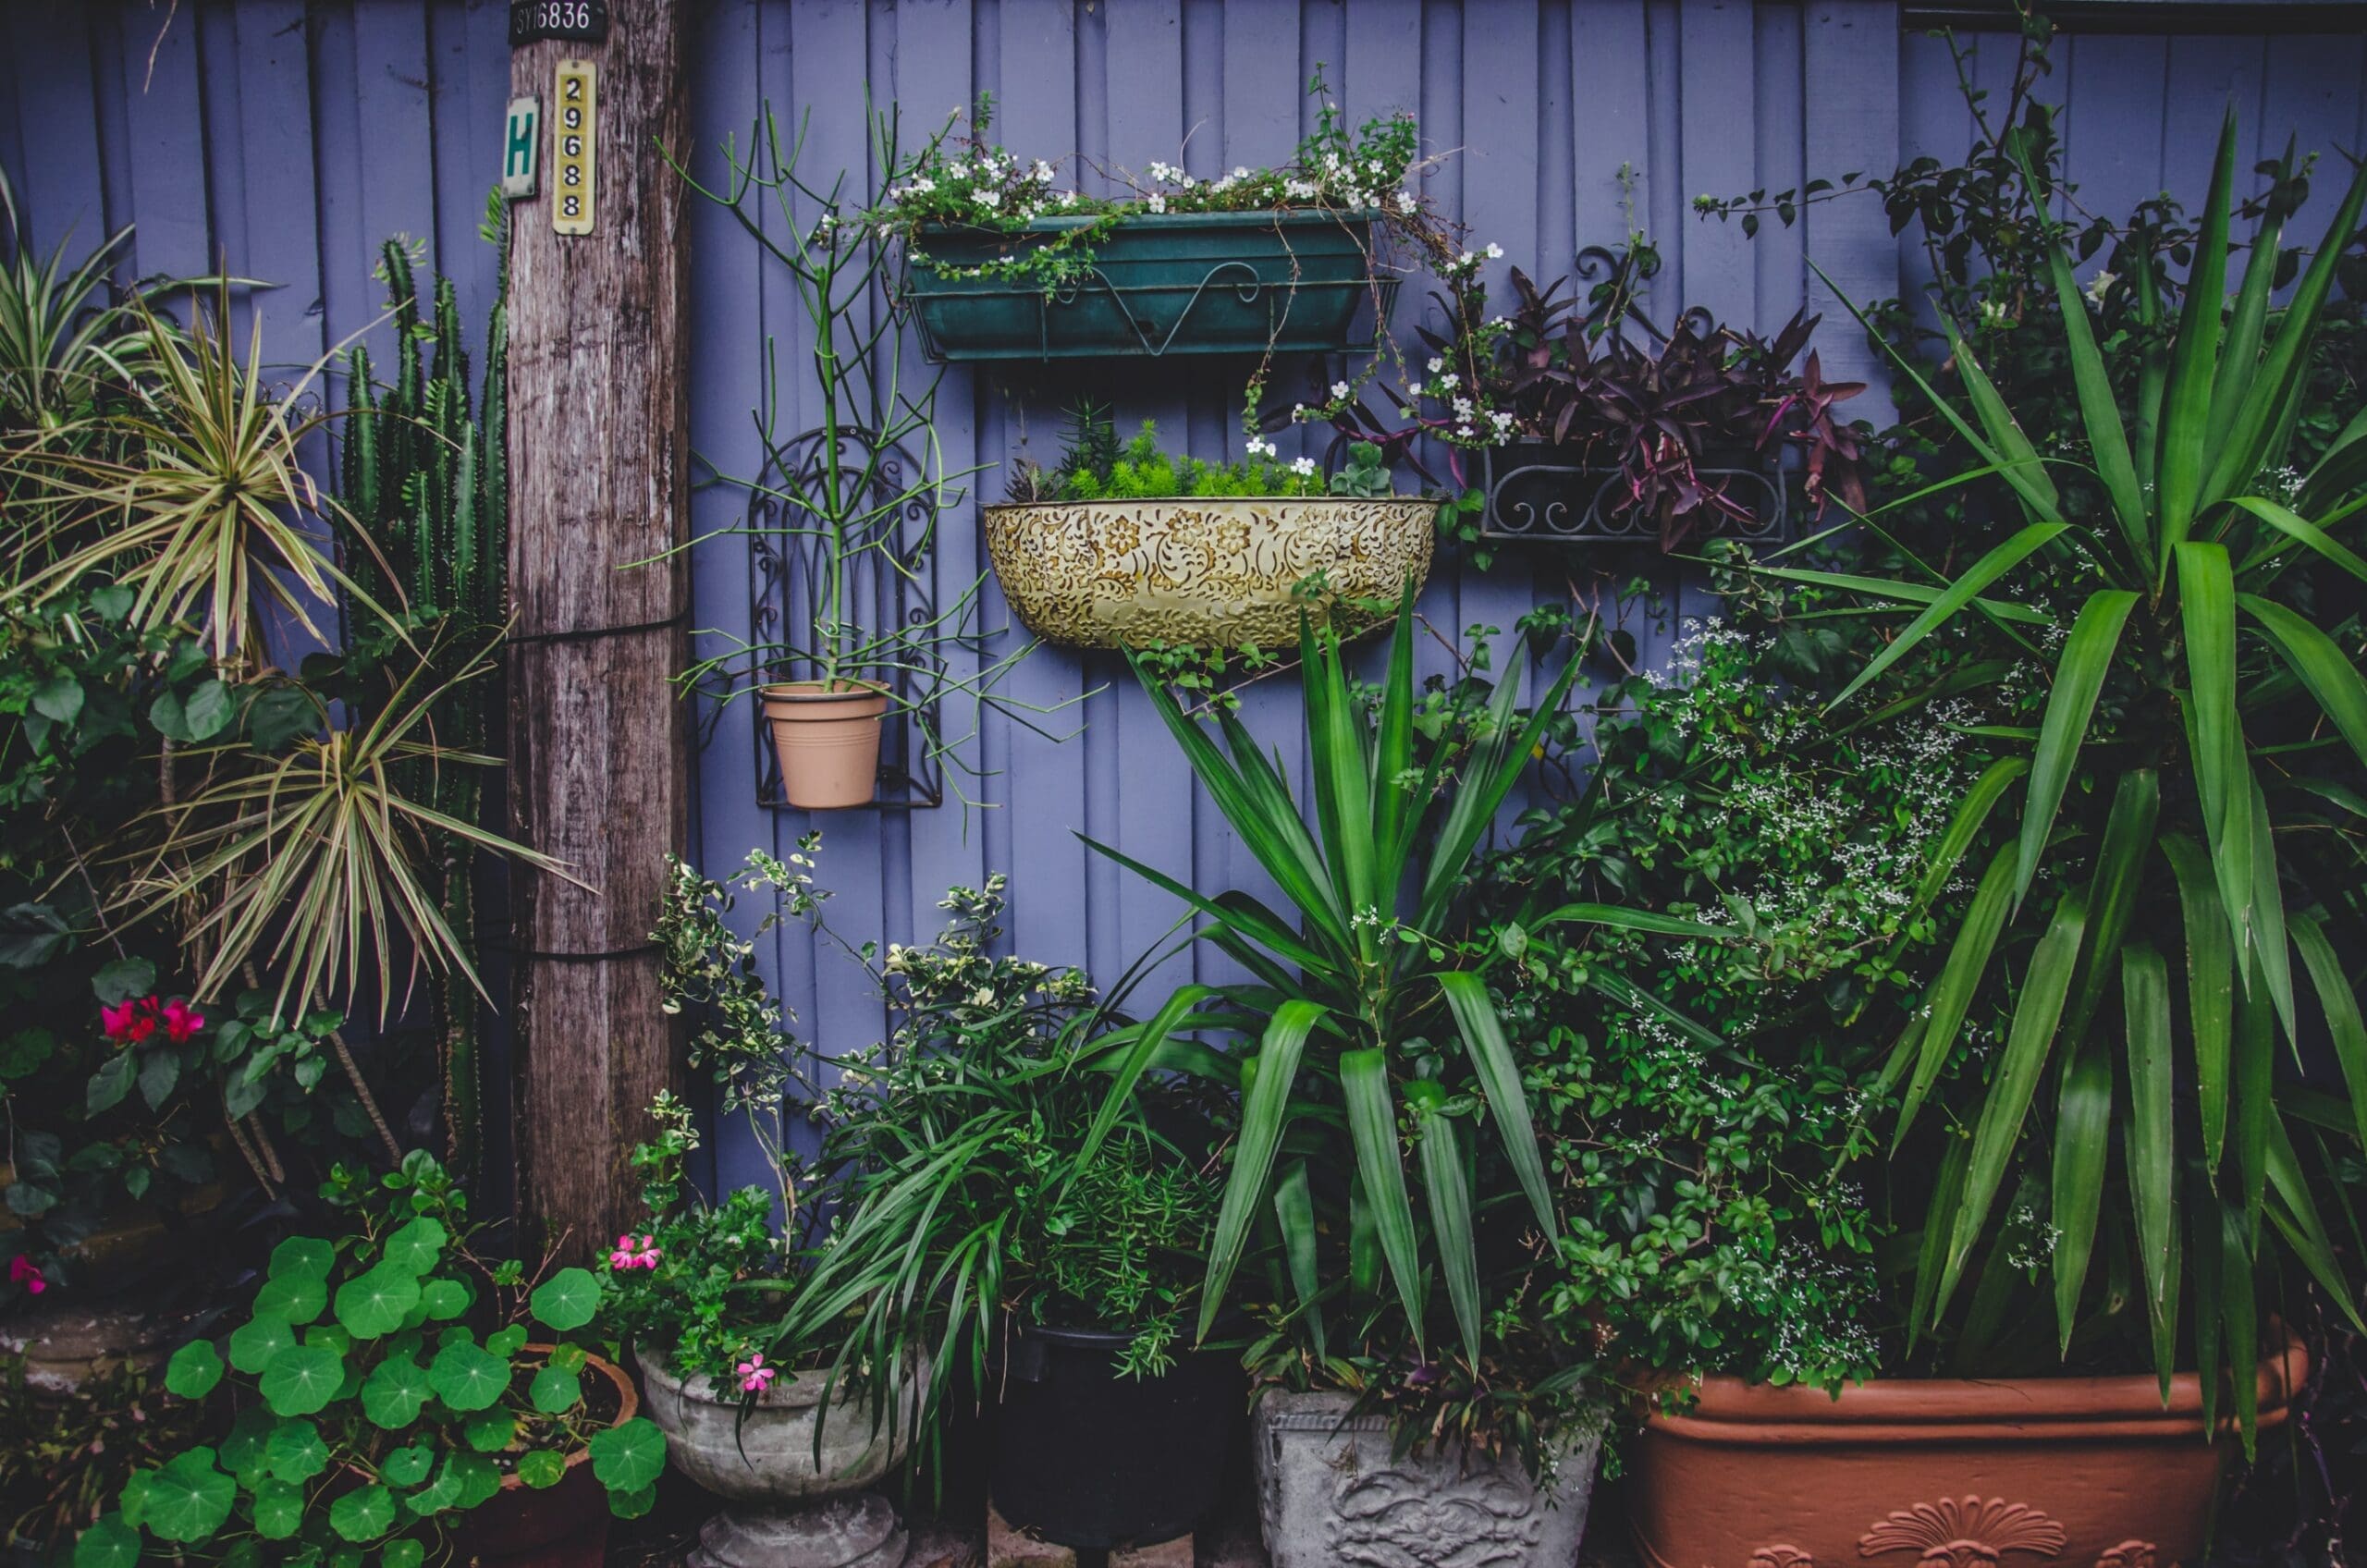 Eco-friendly practices for home—landscaping